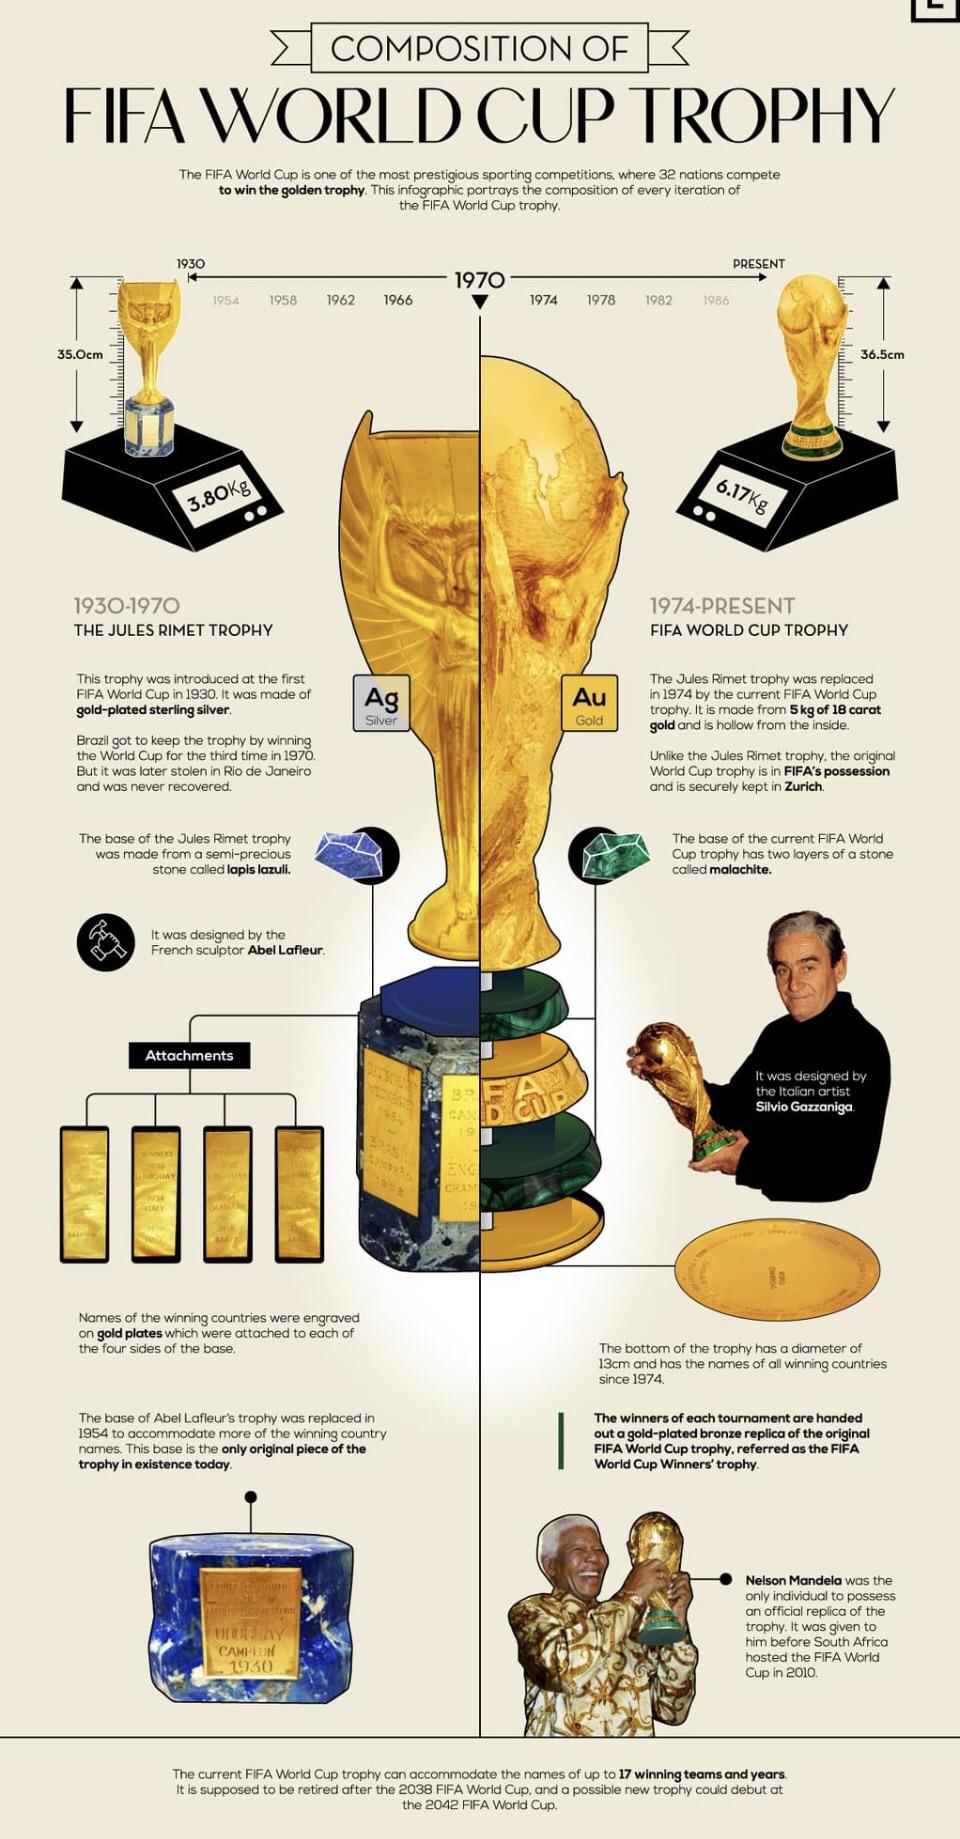 Is the Women's World Cup trophy made of gold and how much is it worth?